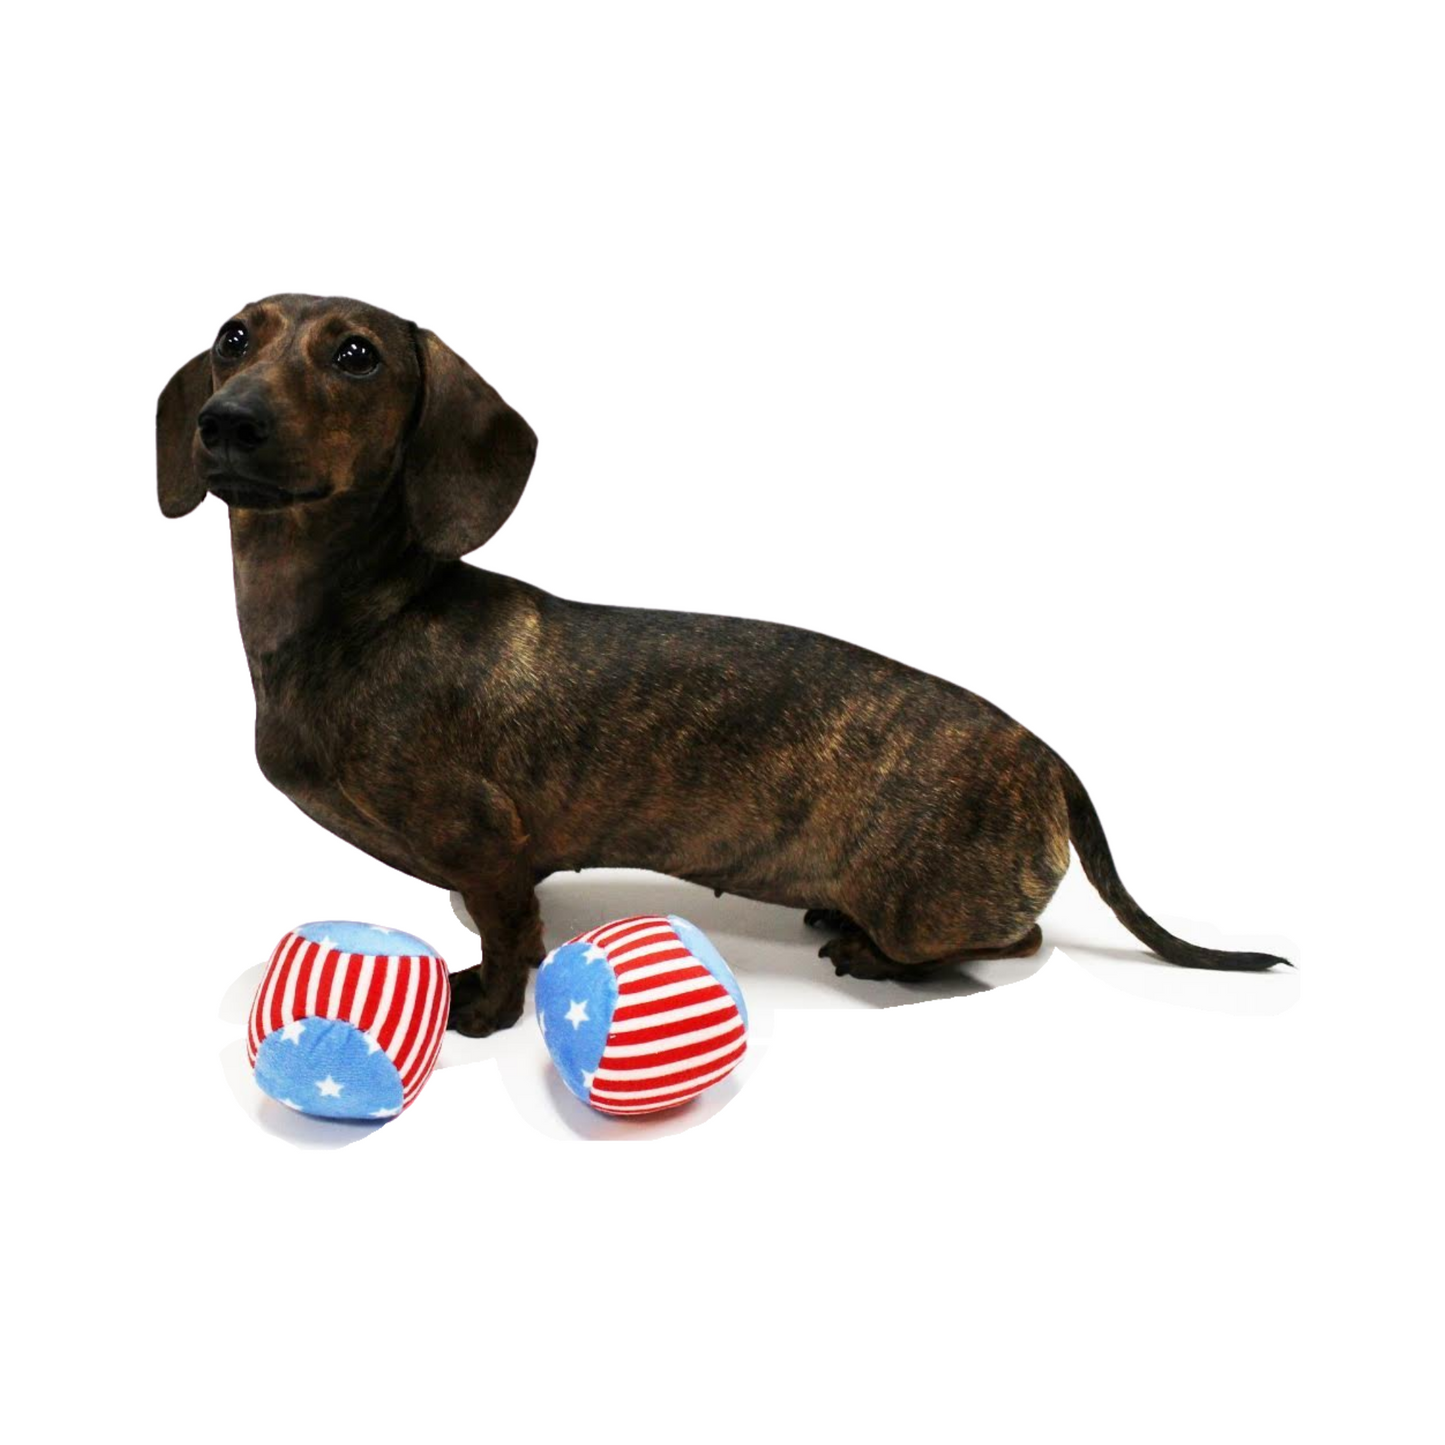 Midlee Star & Stripes 4th of July Dog Ball Toy 3" Pack of 2 (Small)